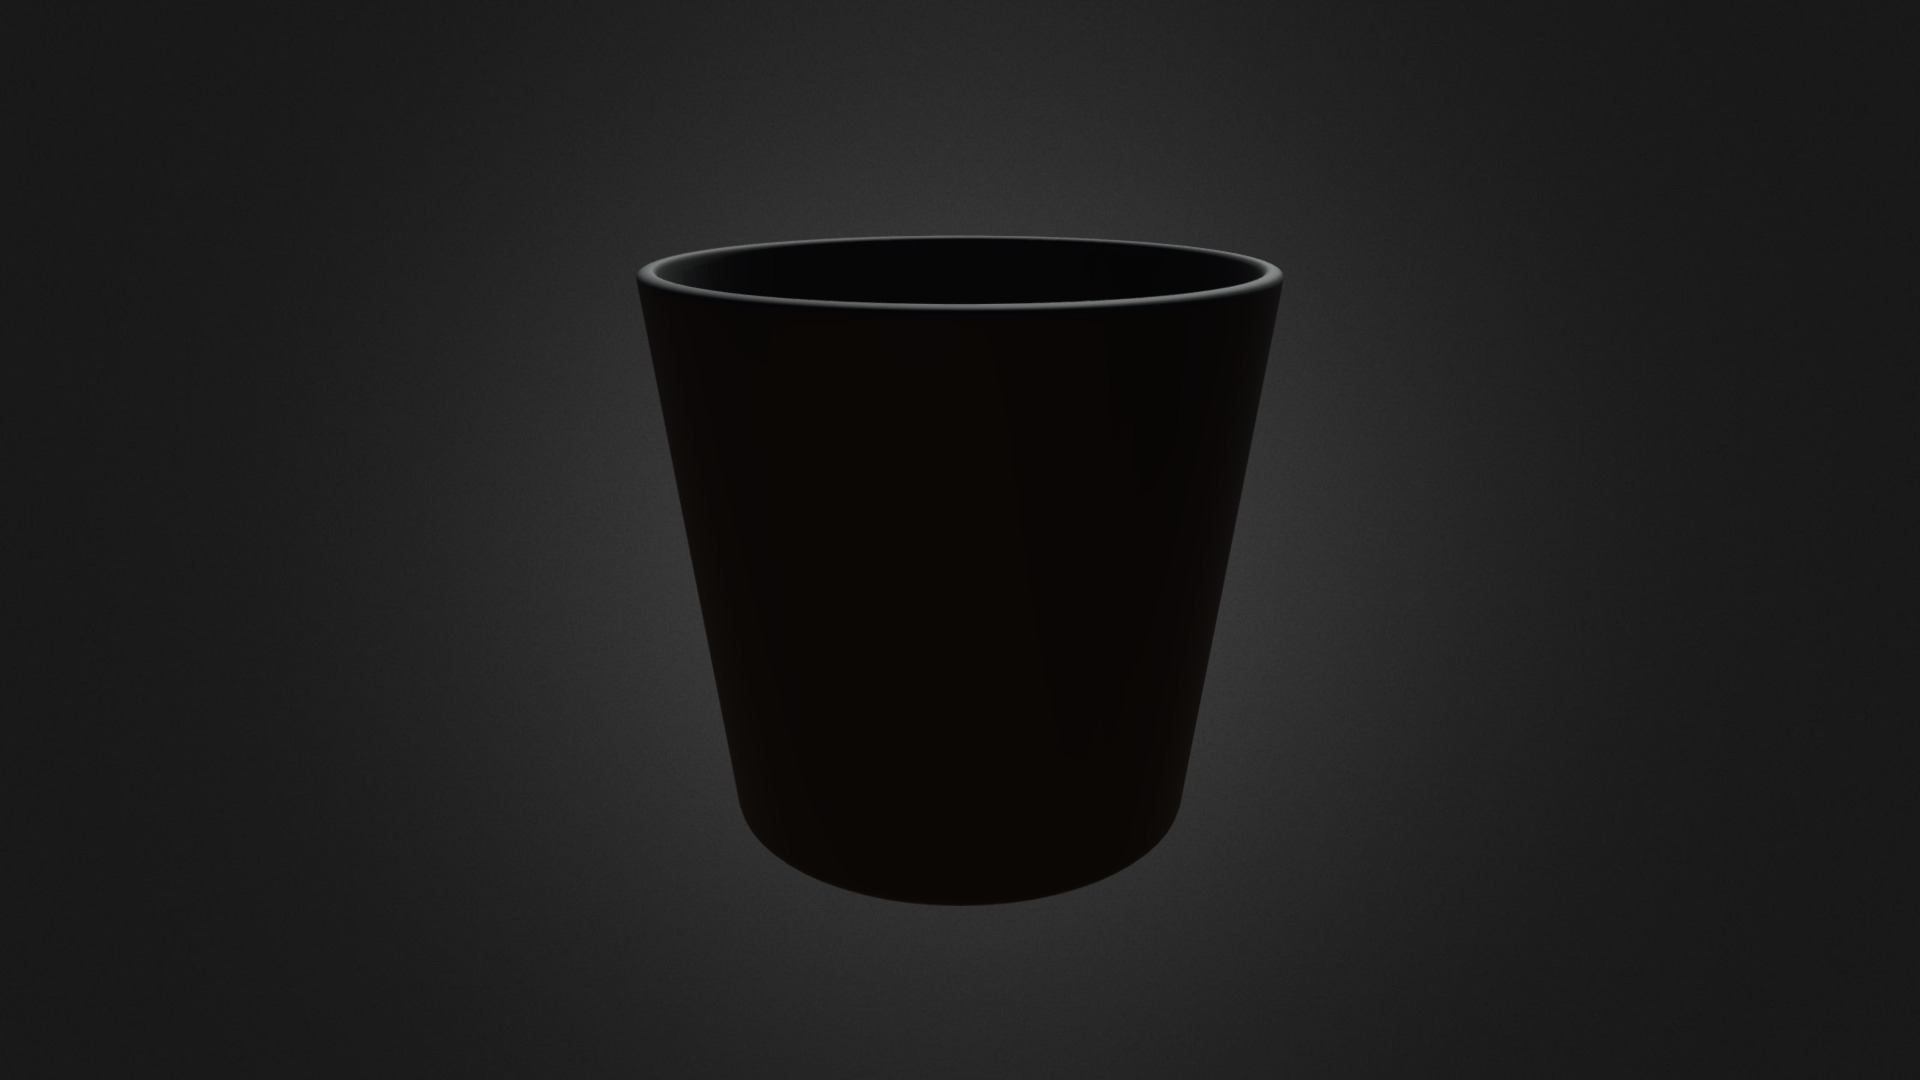 3D model Blue Candle in Glass - This is a 3D model of the Blue Candle in Glass. The 3D model is about a black bowl with a dark background.